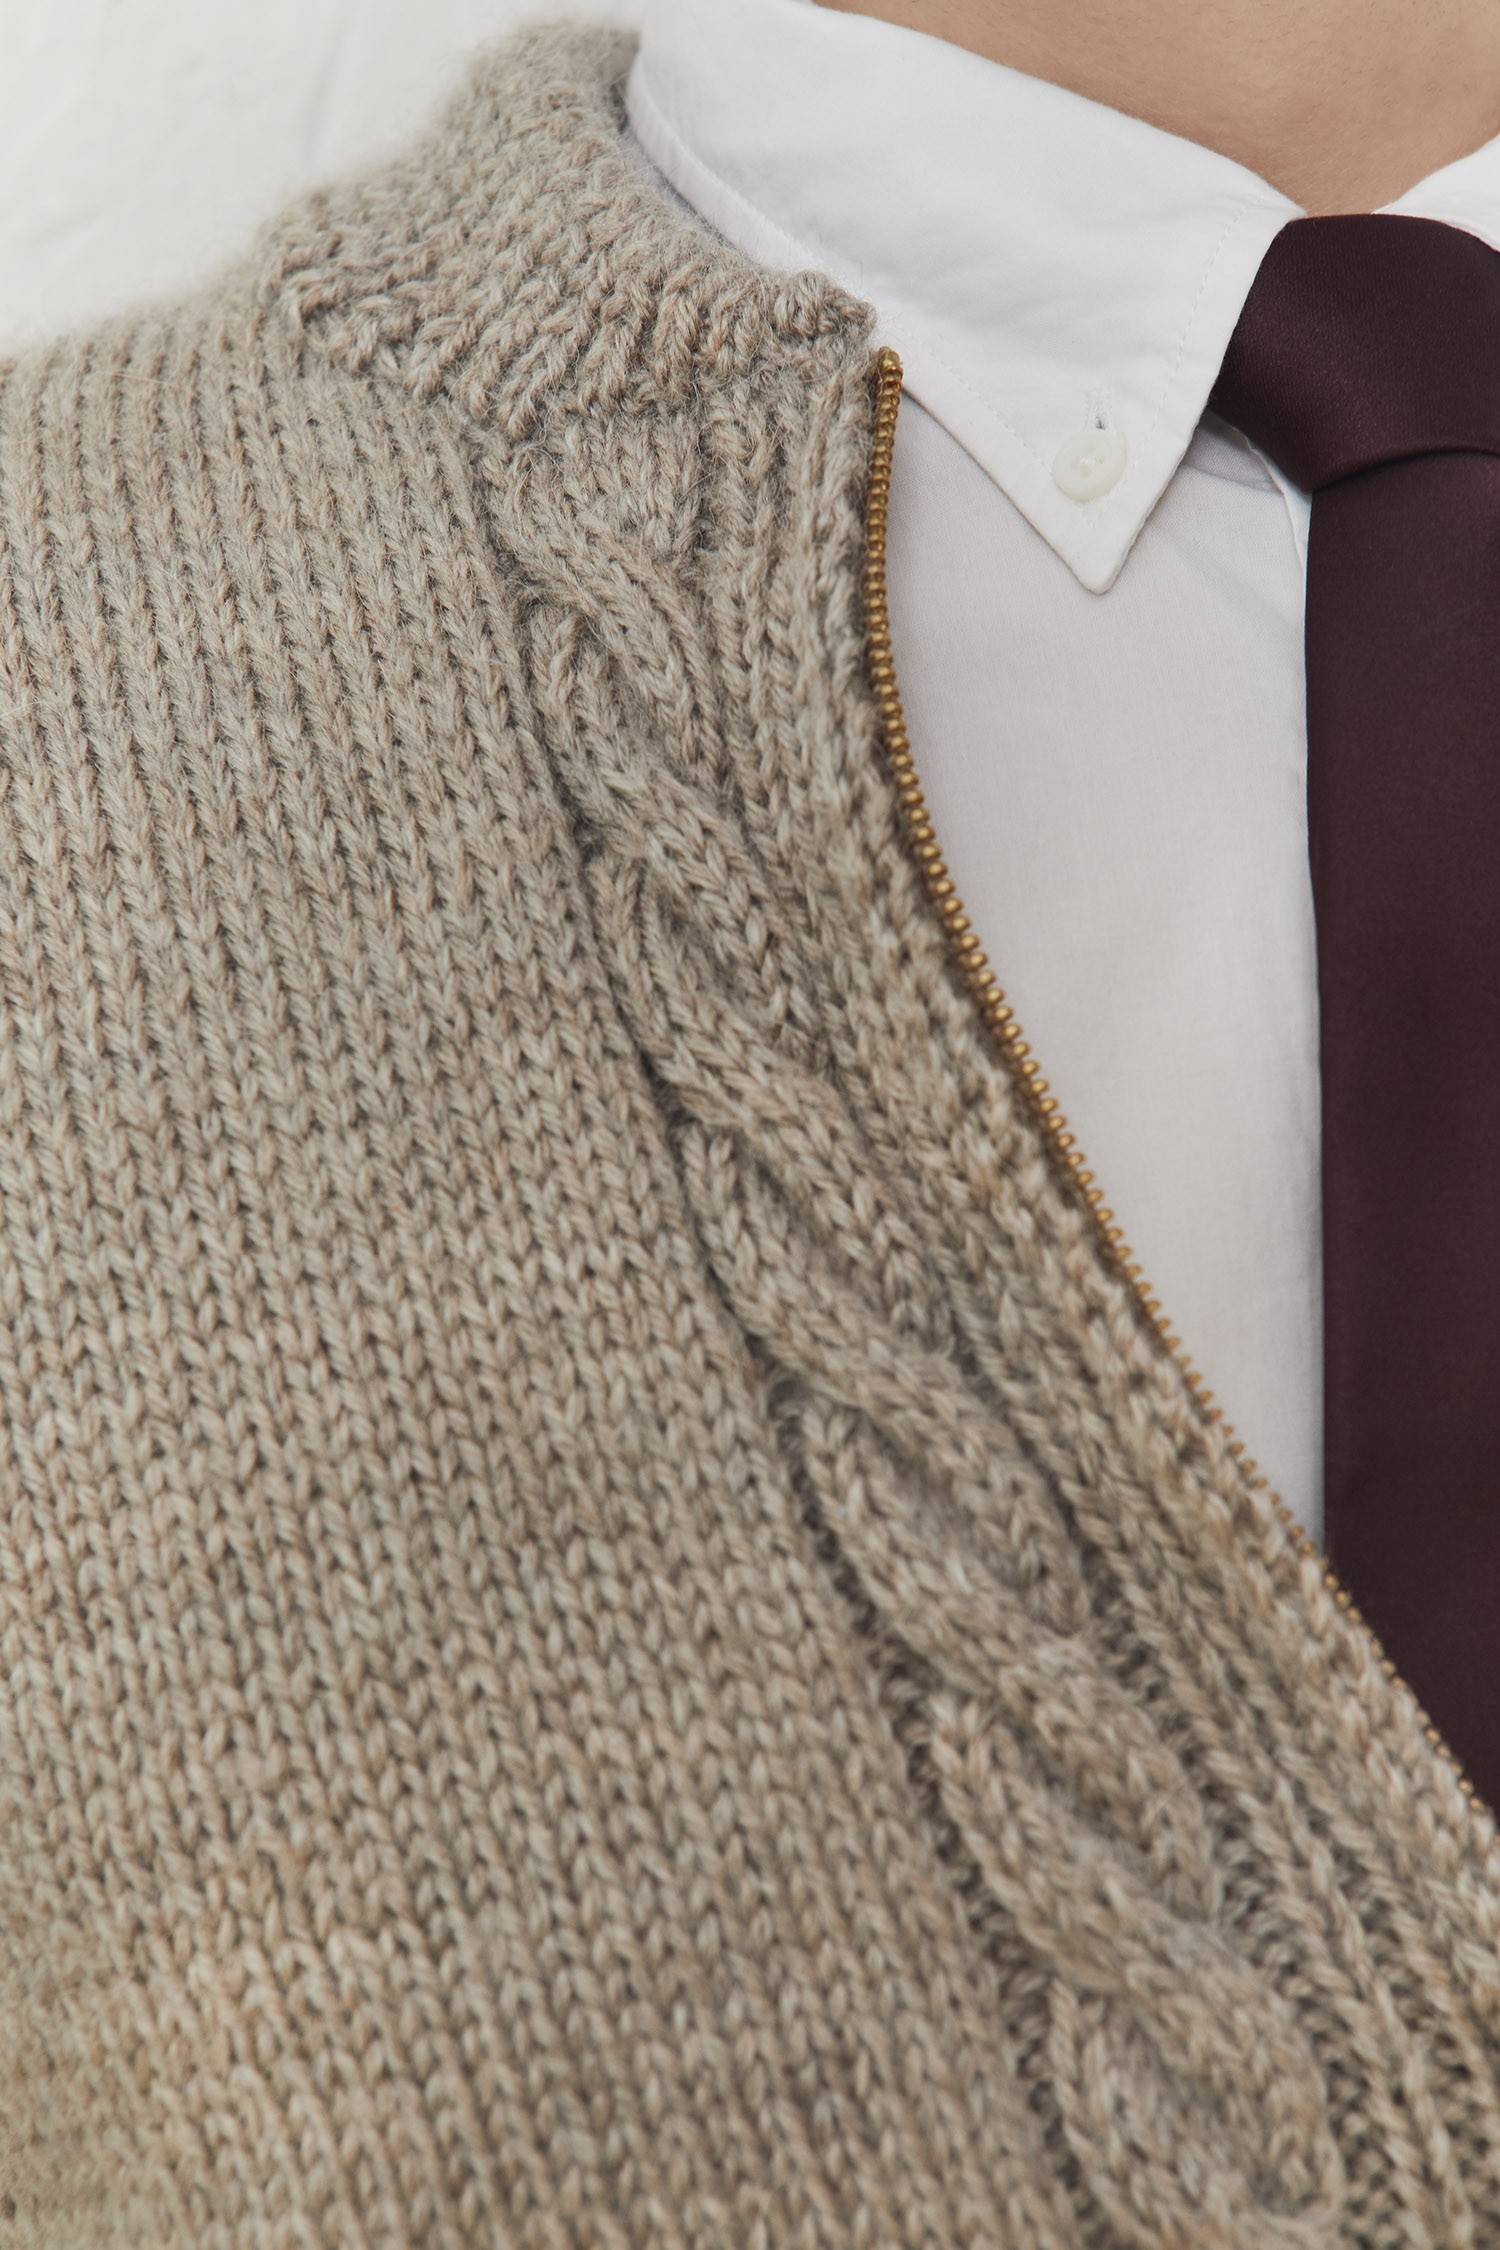 Free Men's Knitting Pattern for a Neighborly Cardigan